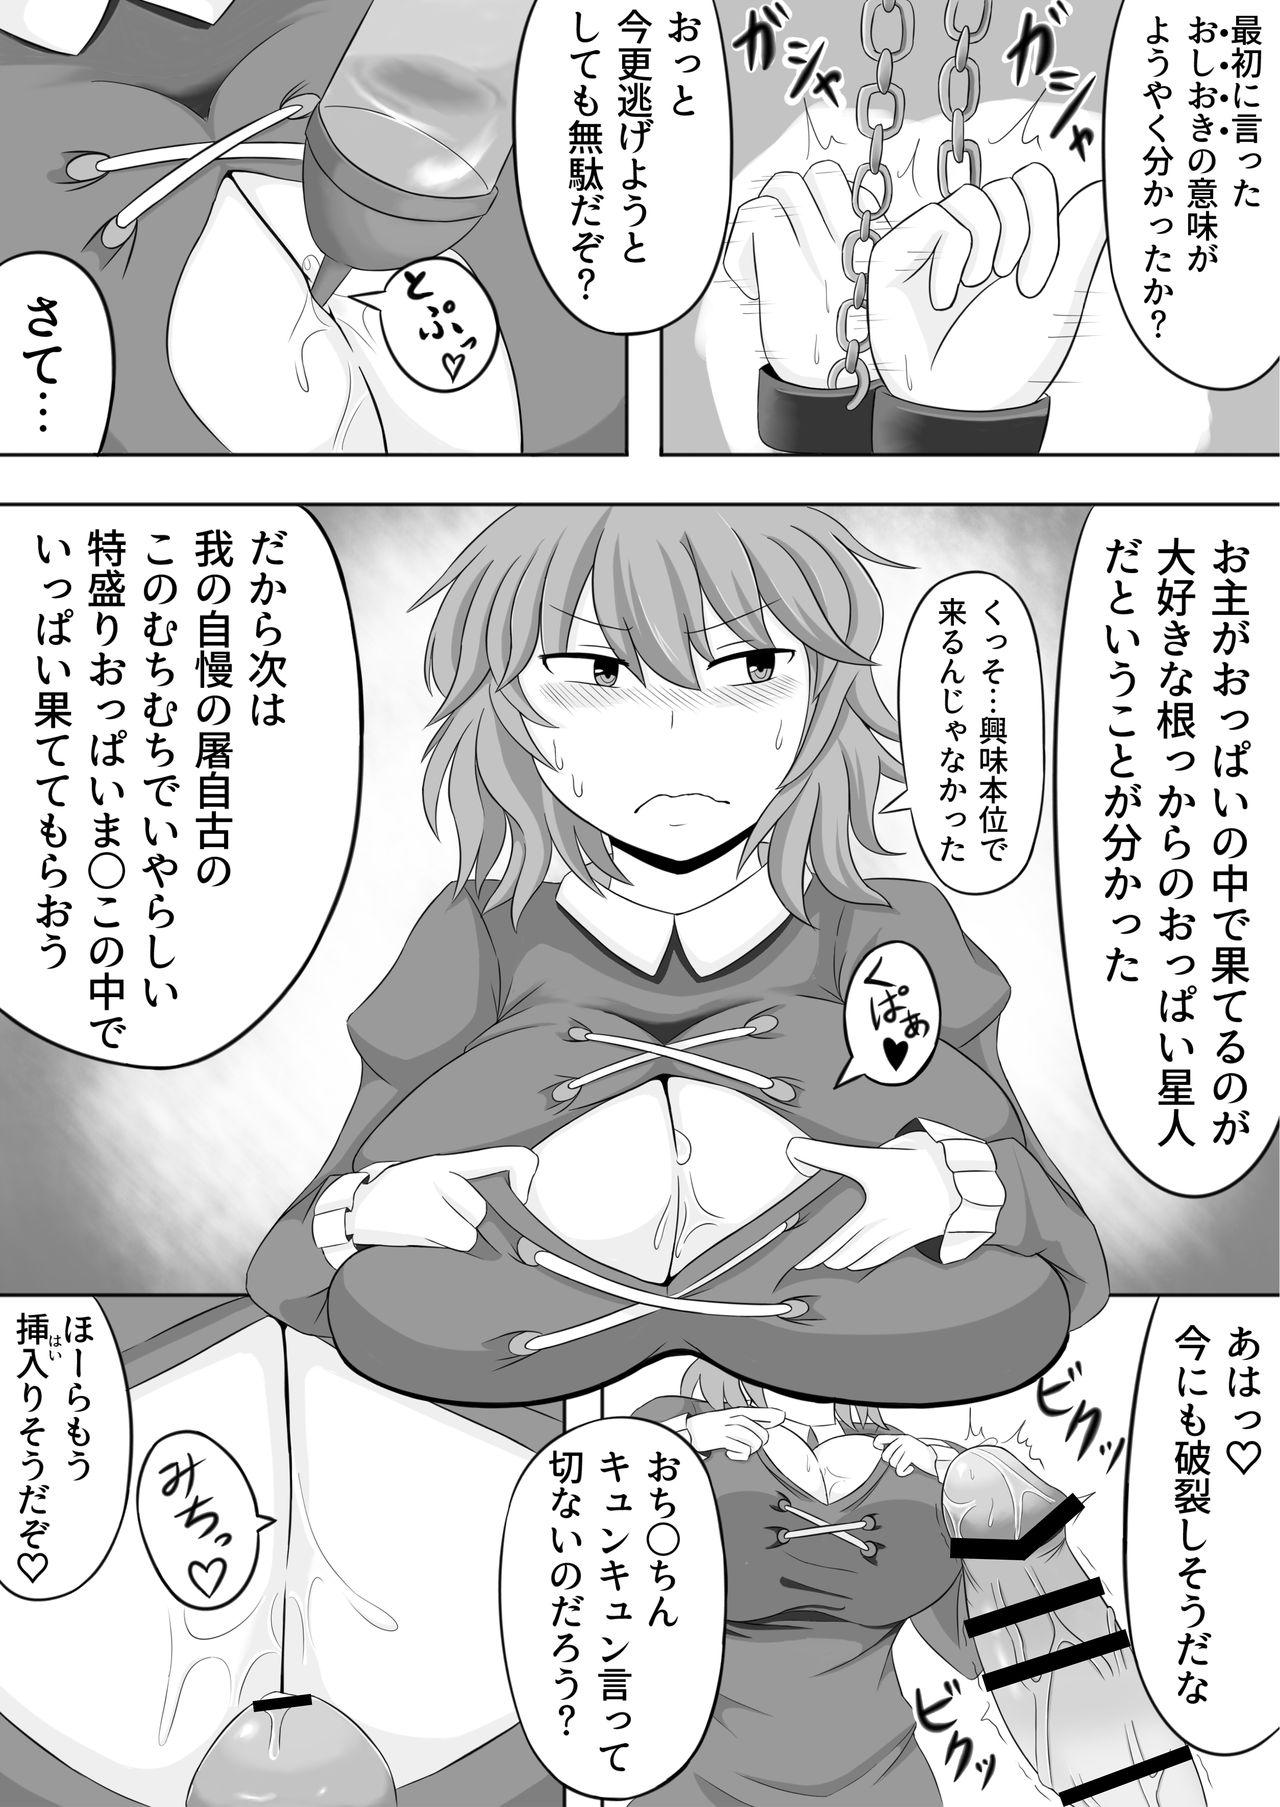 Twinkstudios ふととじ搾り - Touhou project Dick - Page 5